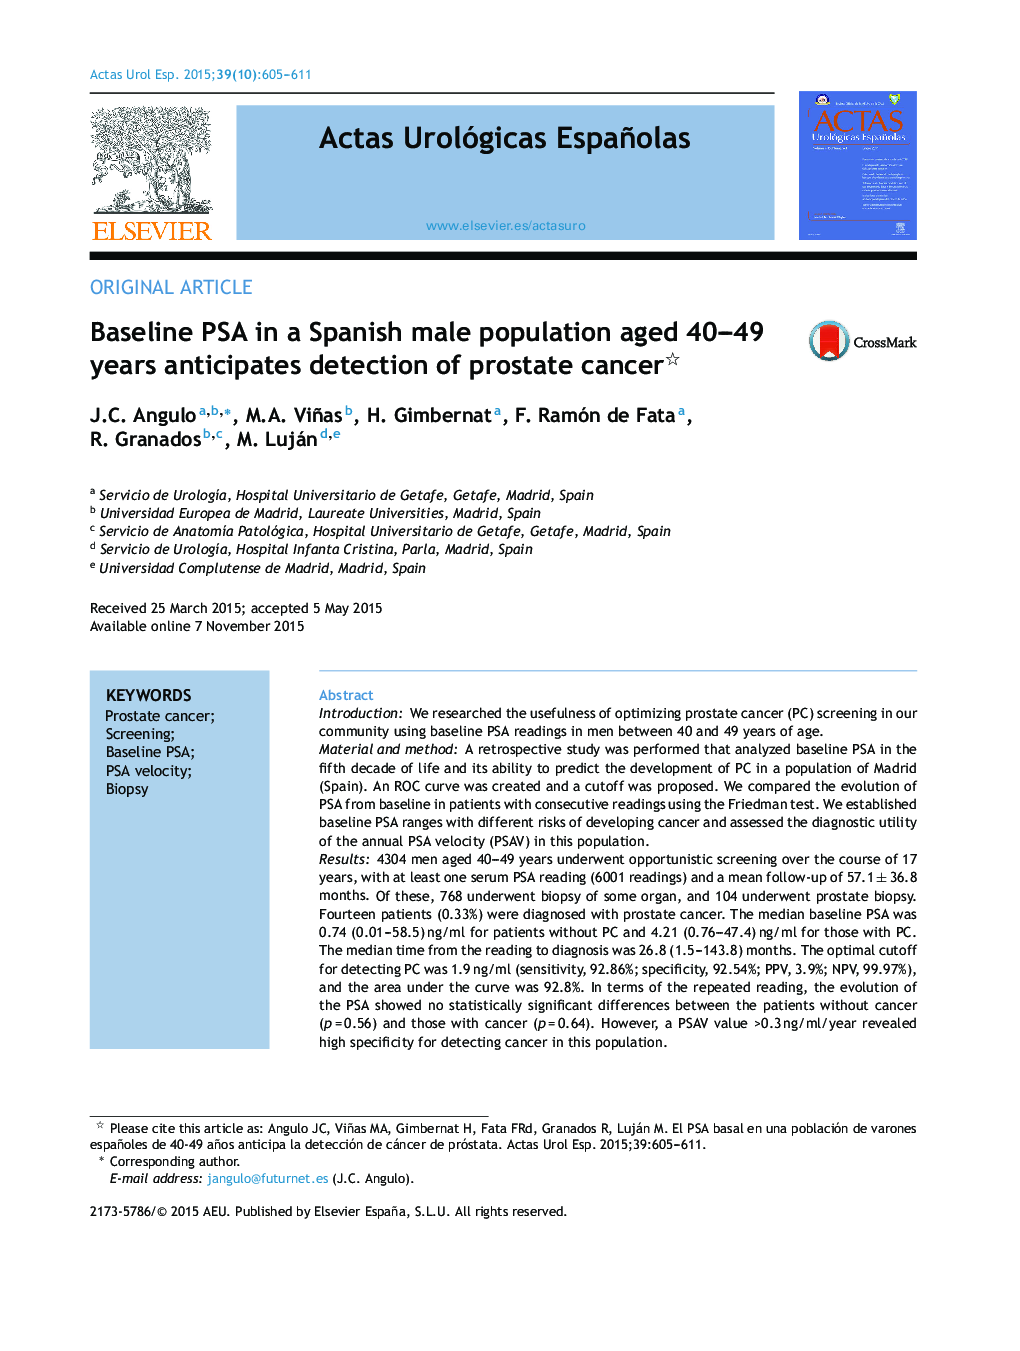 Baseline PSA in a Spanish male population aged 40–49 years anticipates detection of prostate cancer 